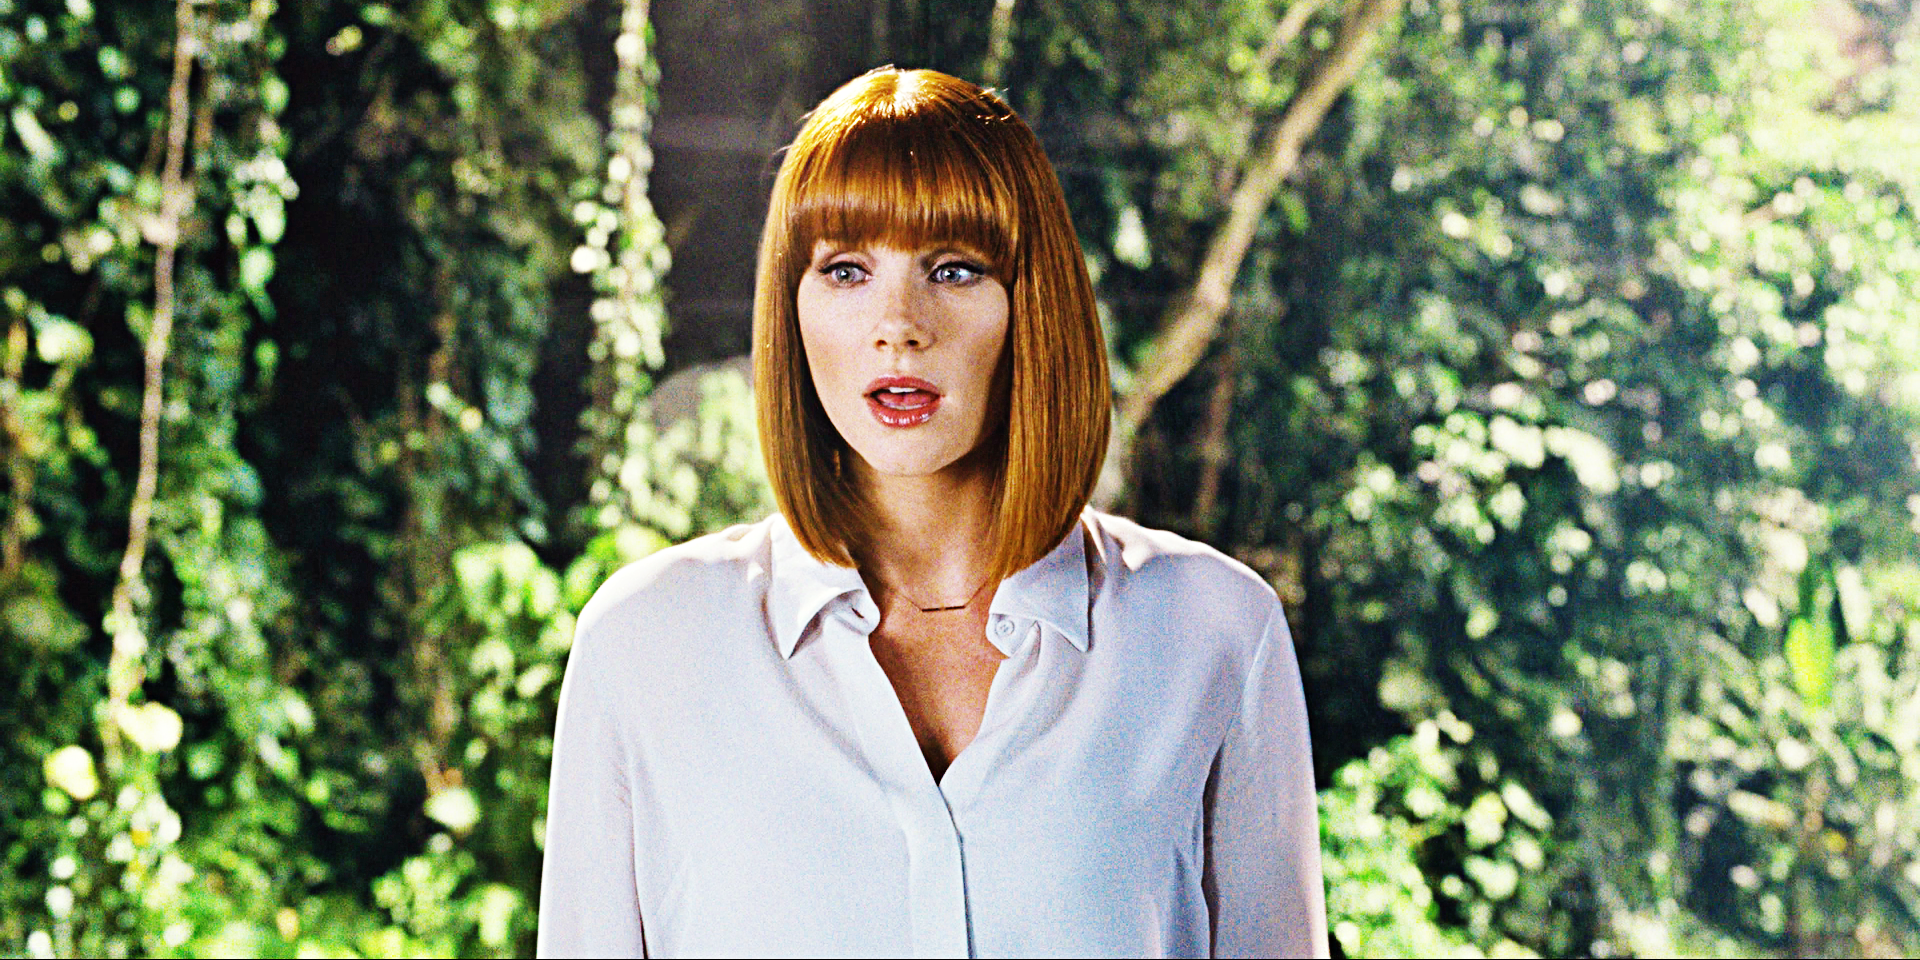 Photo of Jurassic World Screencaps - Claire Dearing for fans of Jurassic Wo...